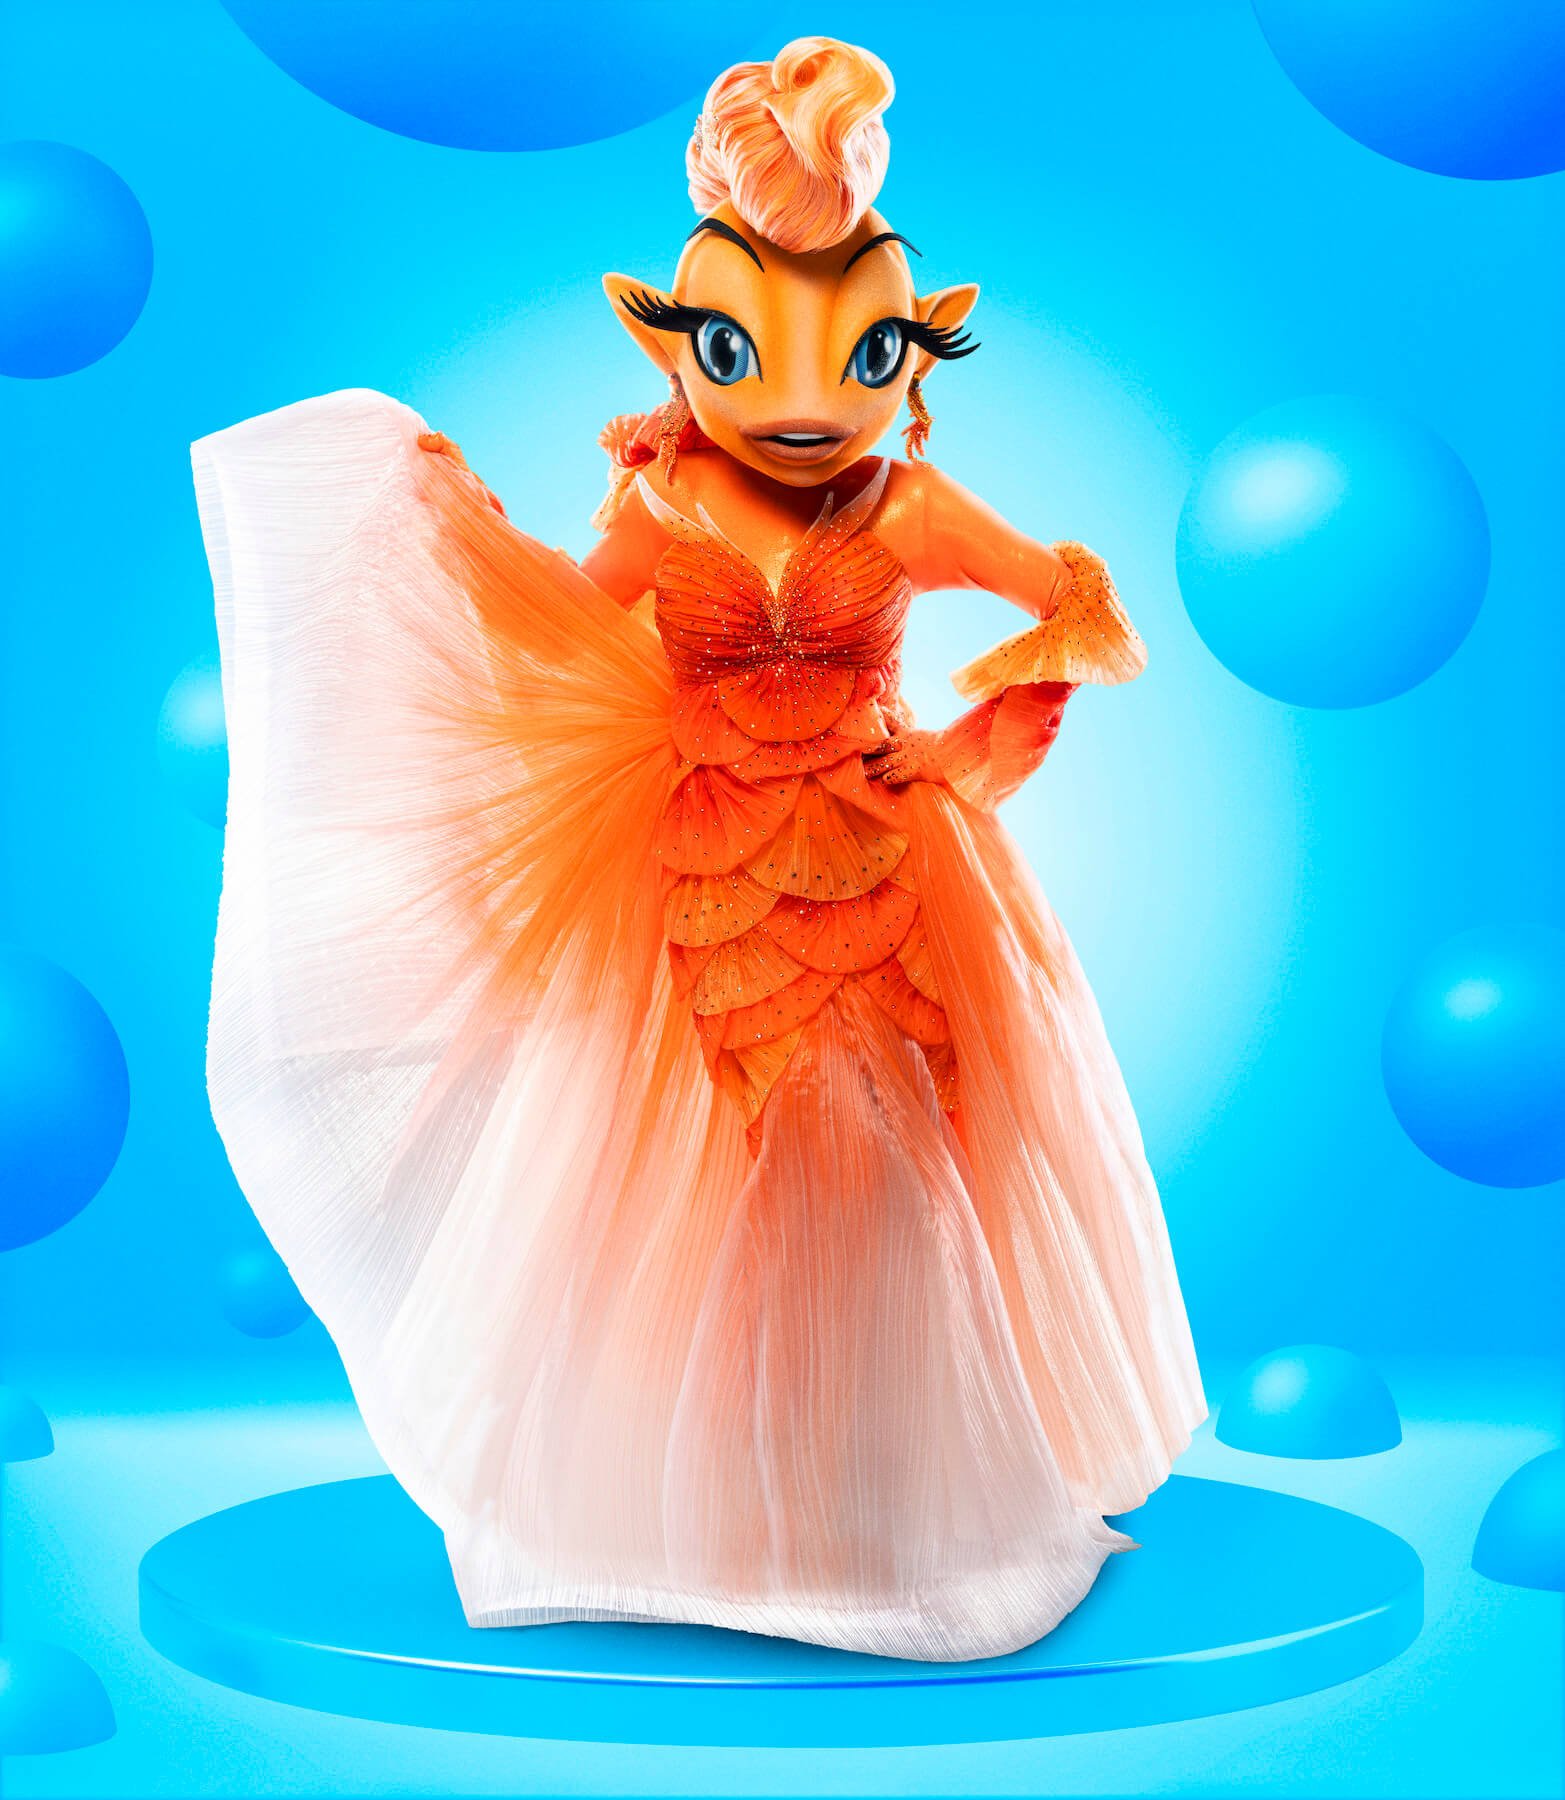 'The Masked Singer' Season 11 Group A singer Goldfish posing against a blue water background